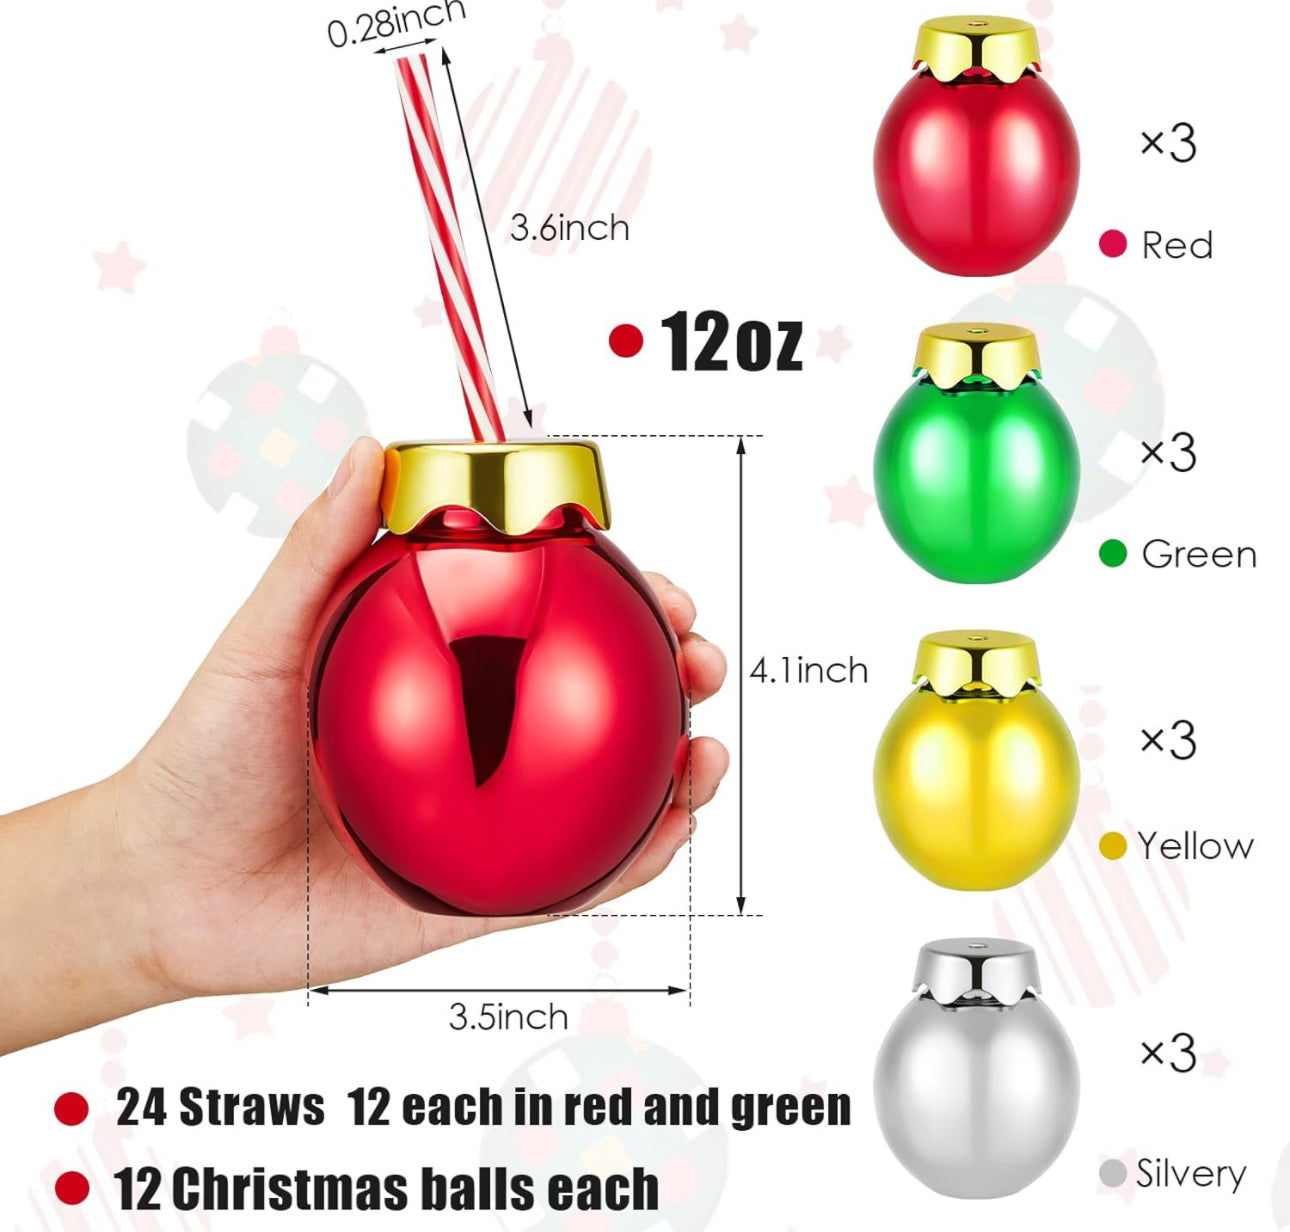 Suclain 12oz Christmas Cups with Lids and Straws Reusable Light Bulb Cups Holiday (Gold, Green, Red, Silver, 12 Pcs)